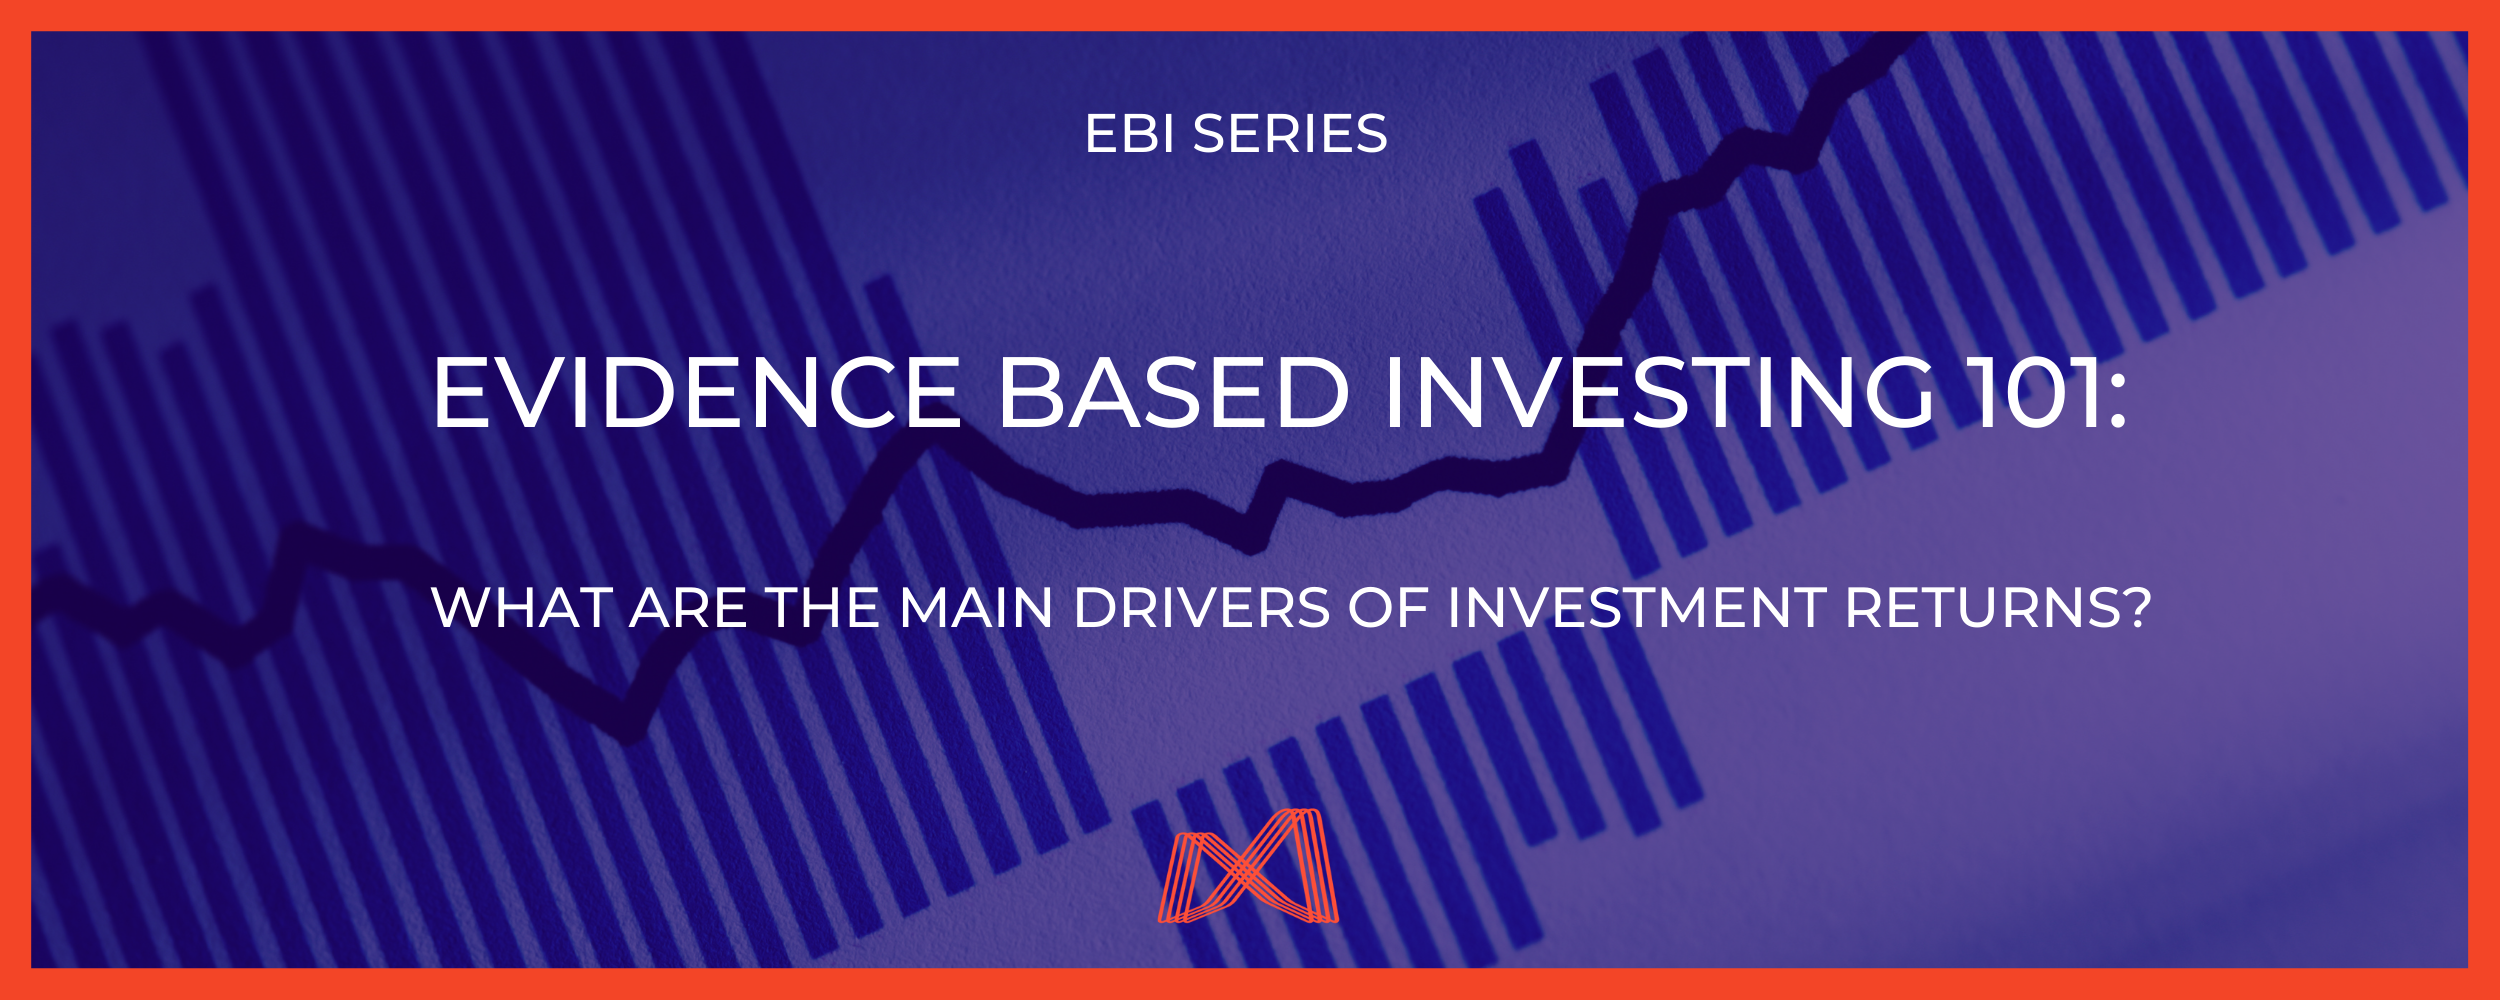 Evidence Based Investing Market Drivers